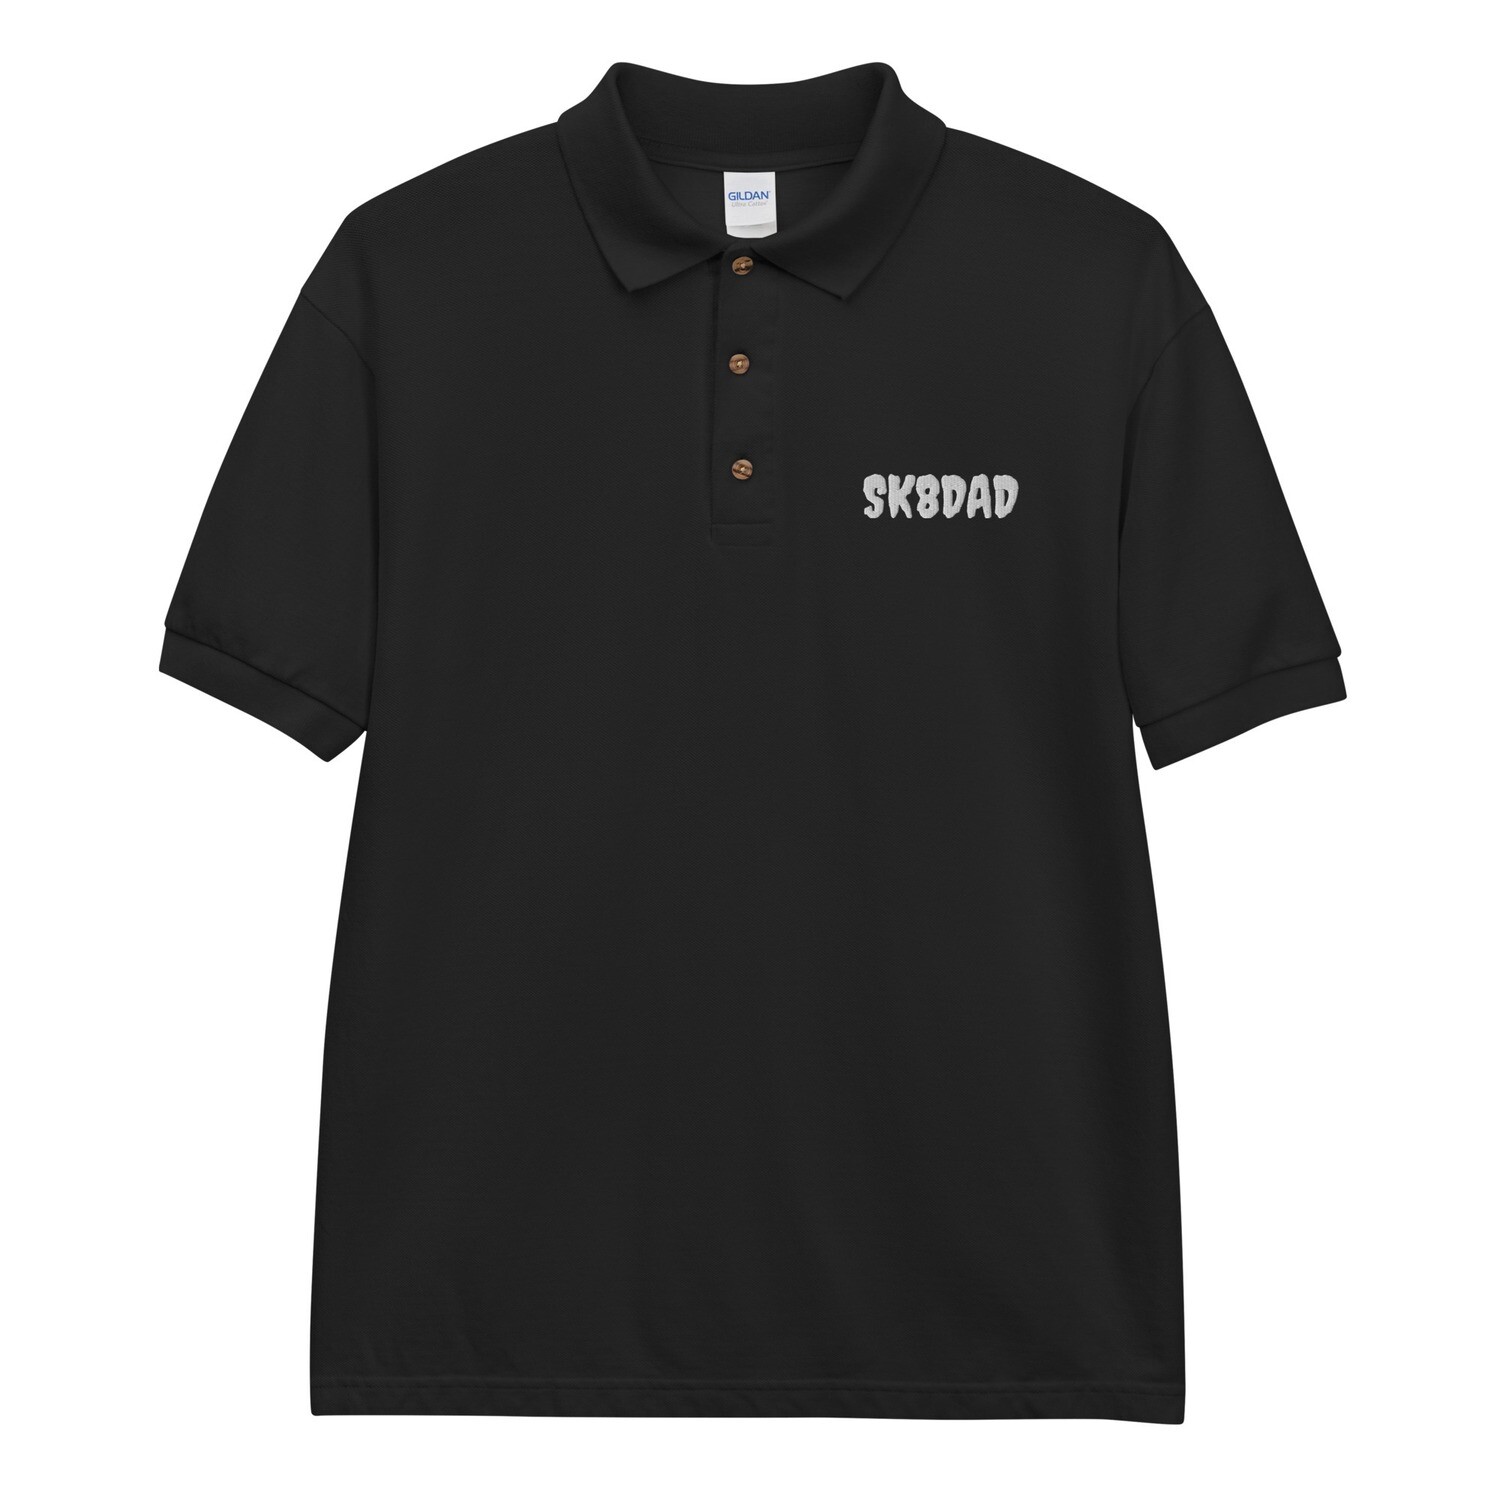 SK8DAD - Embroidered Polo Shirt